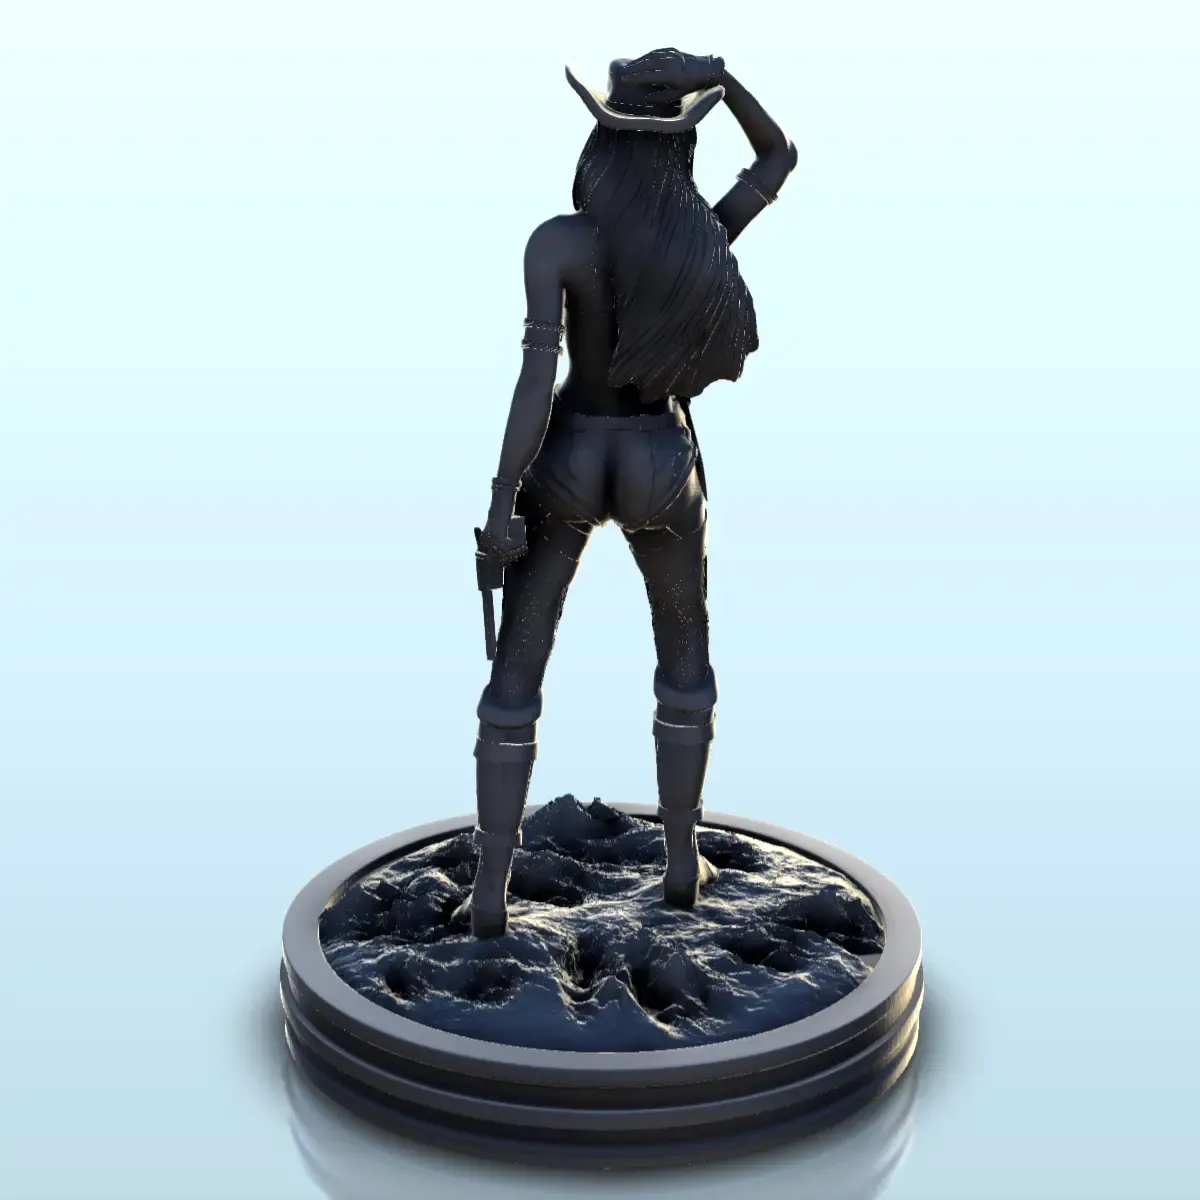 Woman with knives and revolver (19) - Old West Figure mini